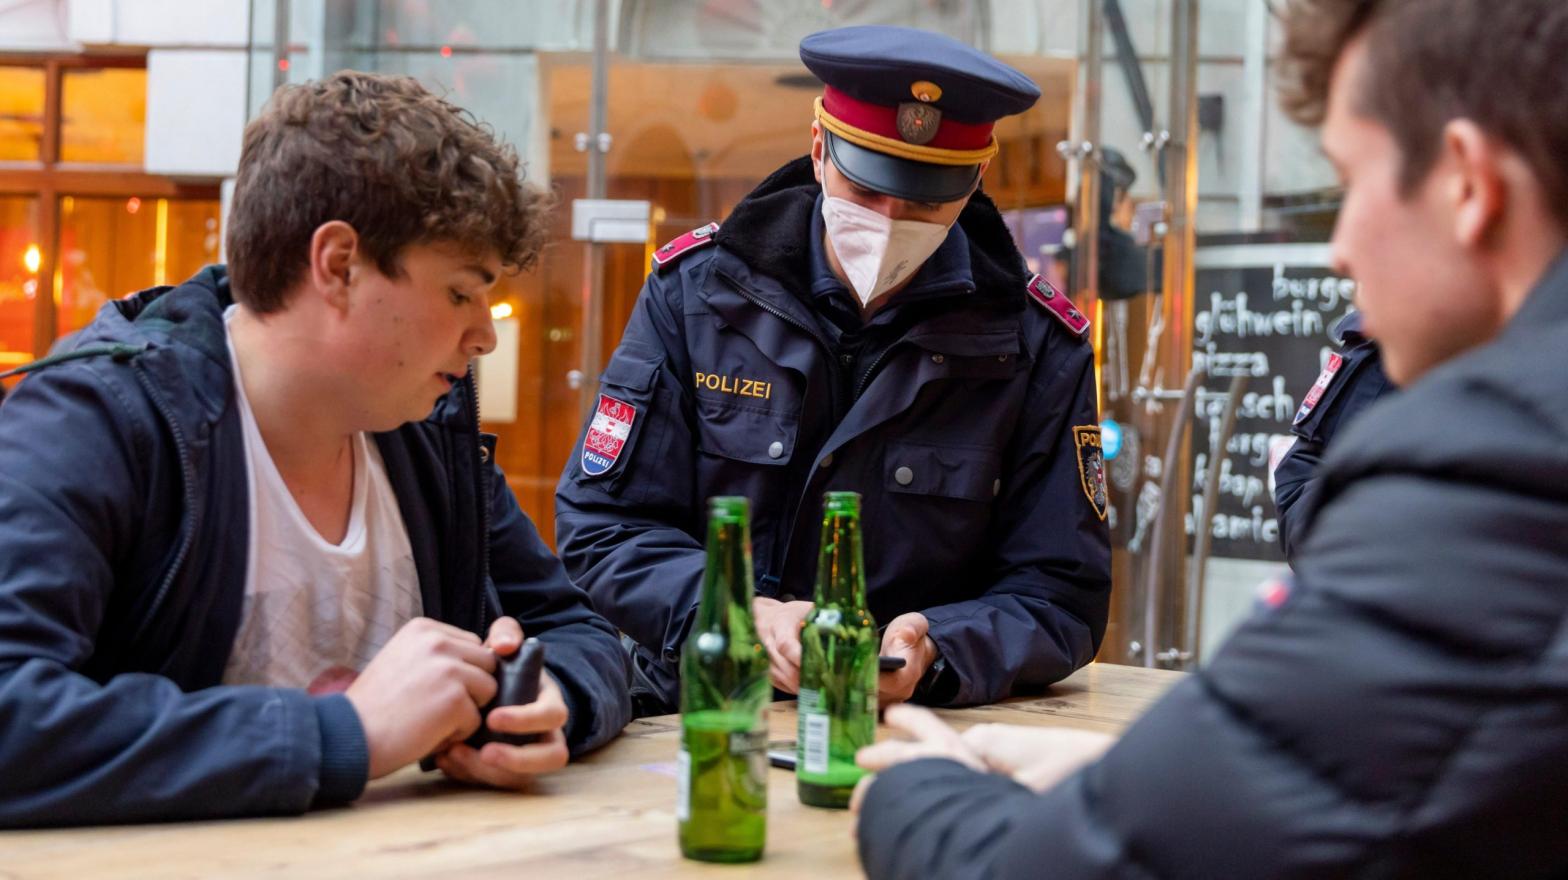 Police officers check the vaccination status of patrons during the first day of a nationwide lockdown for people not yet vaccinated against the covid-19 on November 15, 2021 in Innsbruck, Austria. (Photo: Jan Hetfleisch, Getty Images)